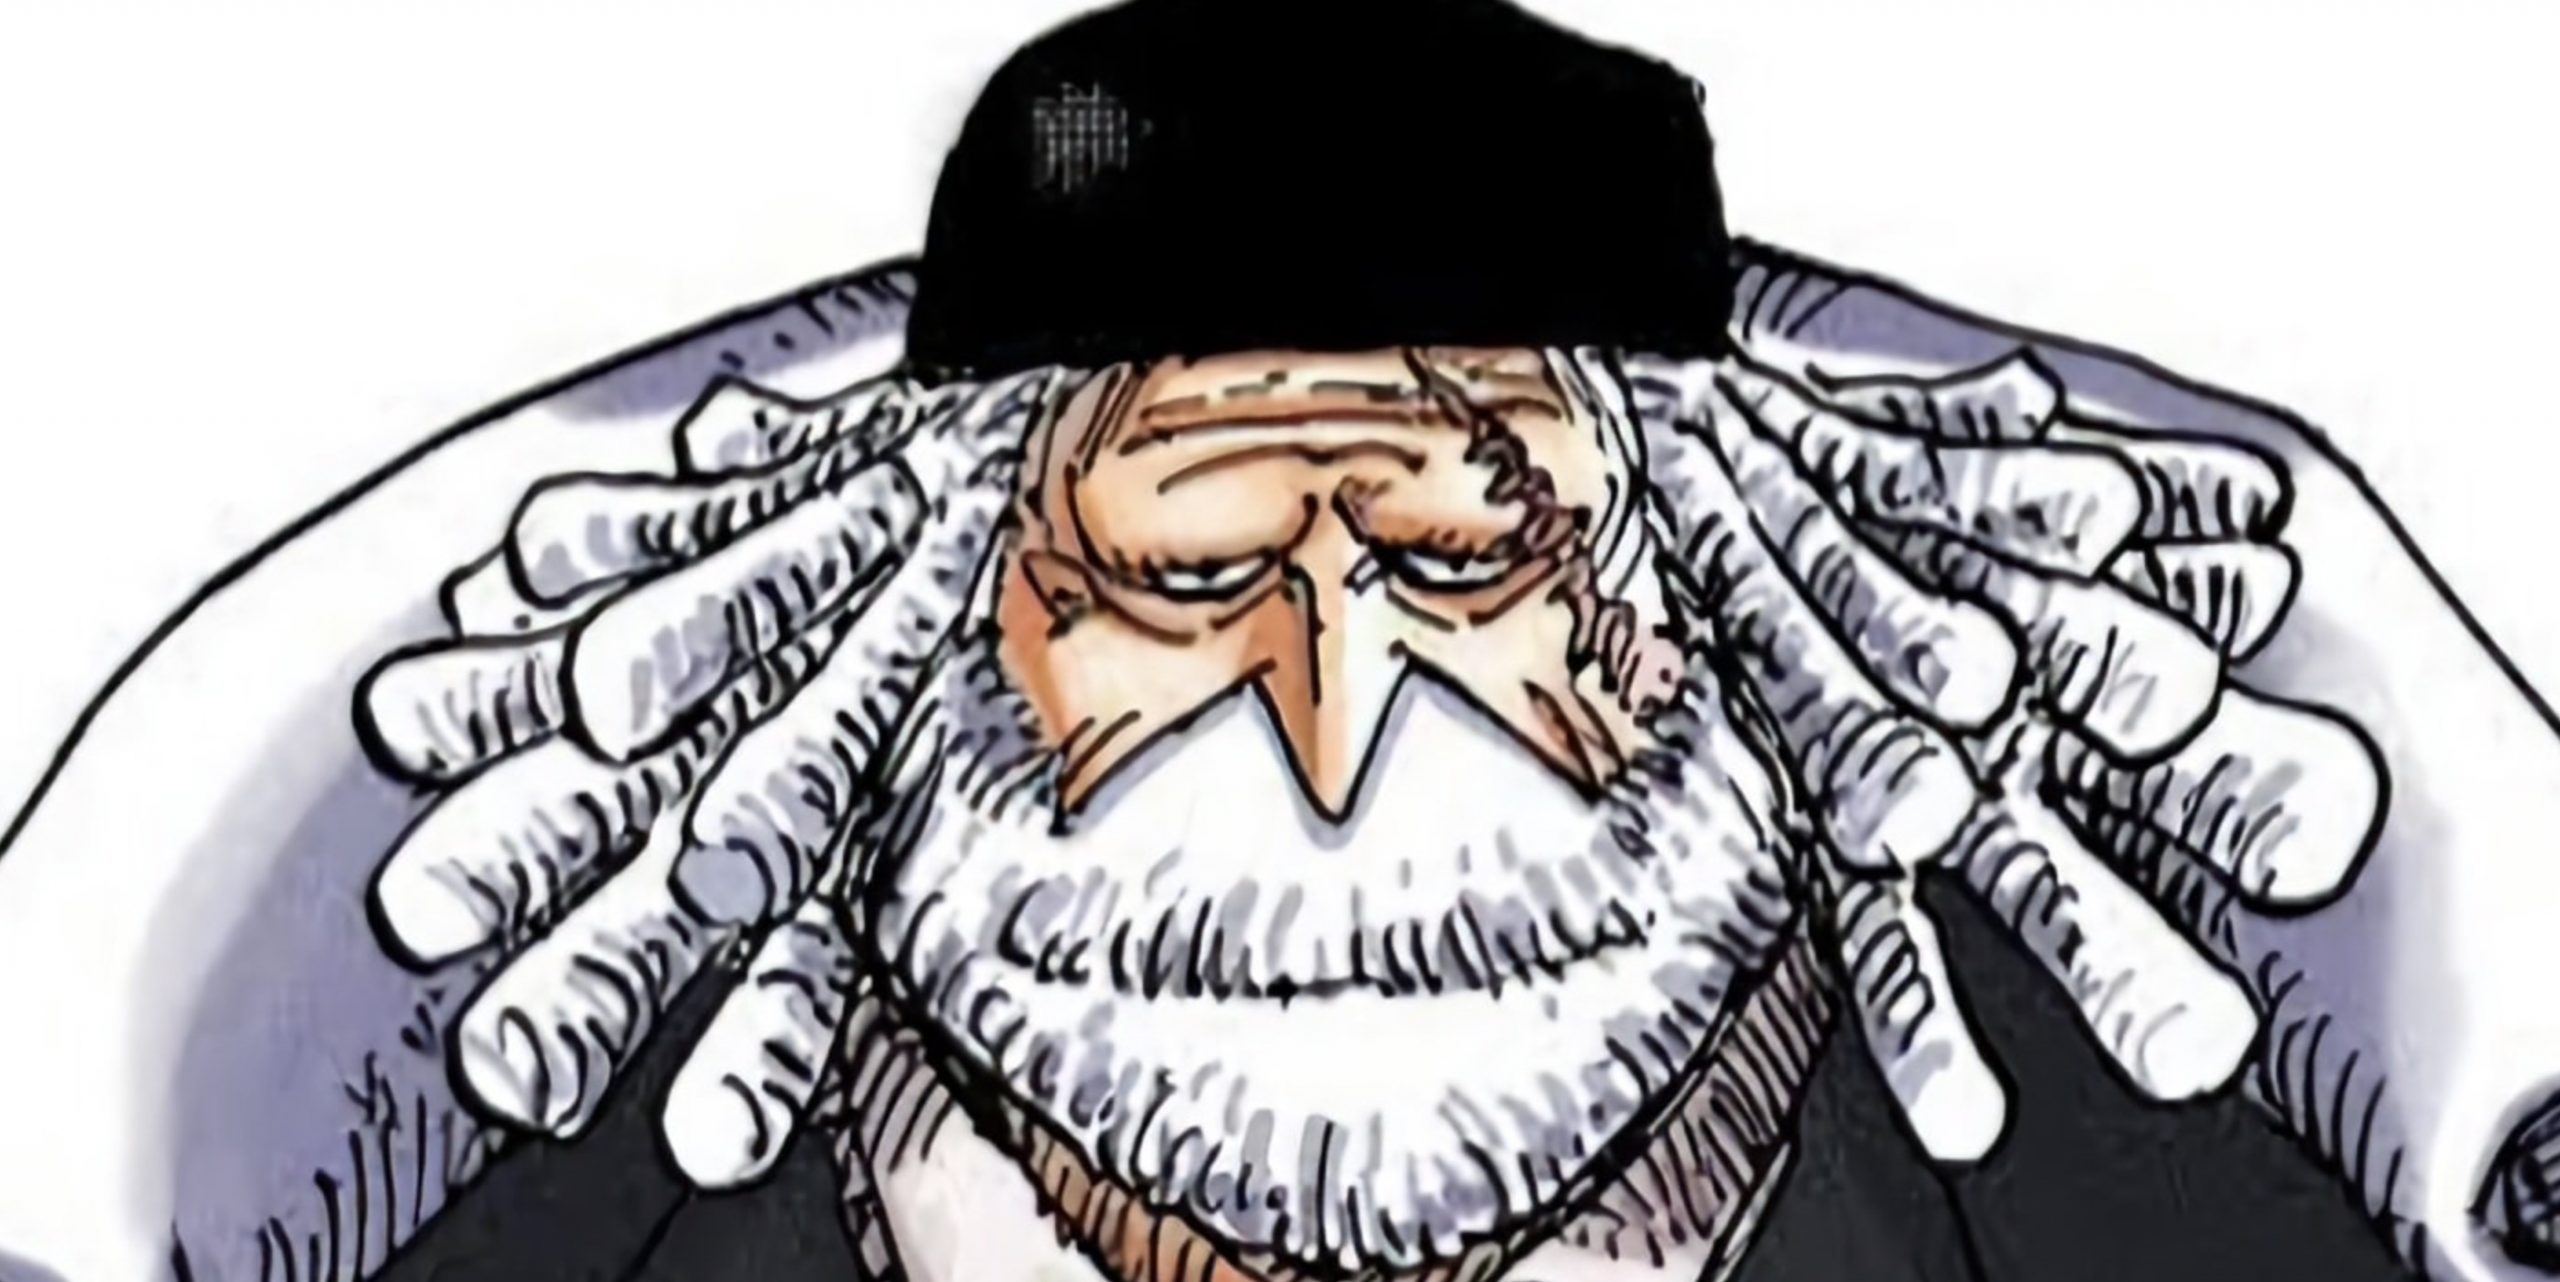 The Worst One Piece Character So Far - Jugarcia Saturn 